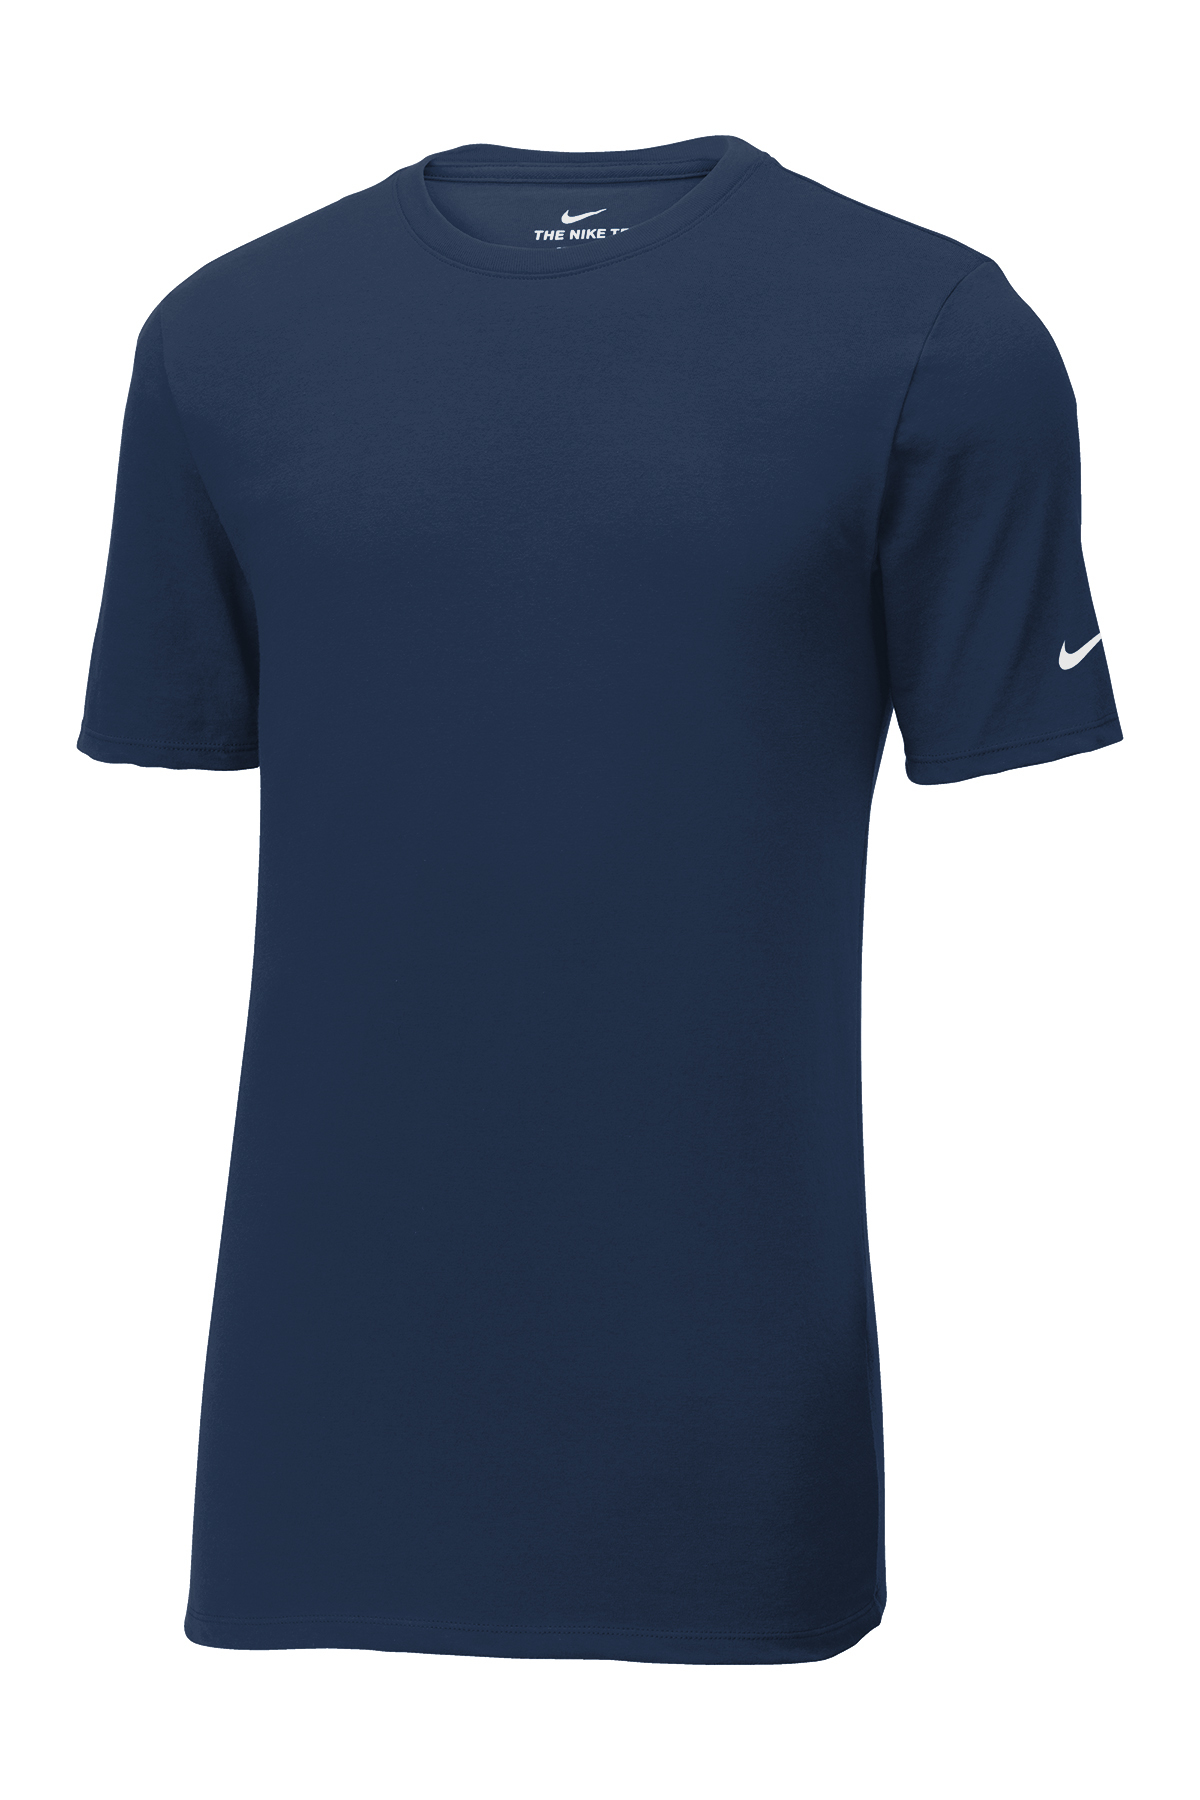 Nike Dri-FIT Cotton/Poly Tee | Product | Company Casuals